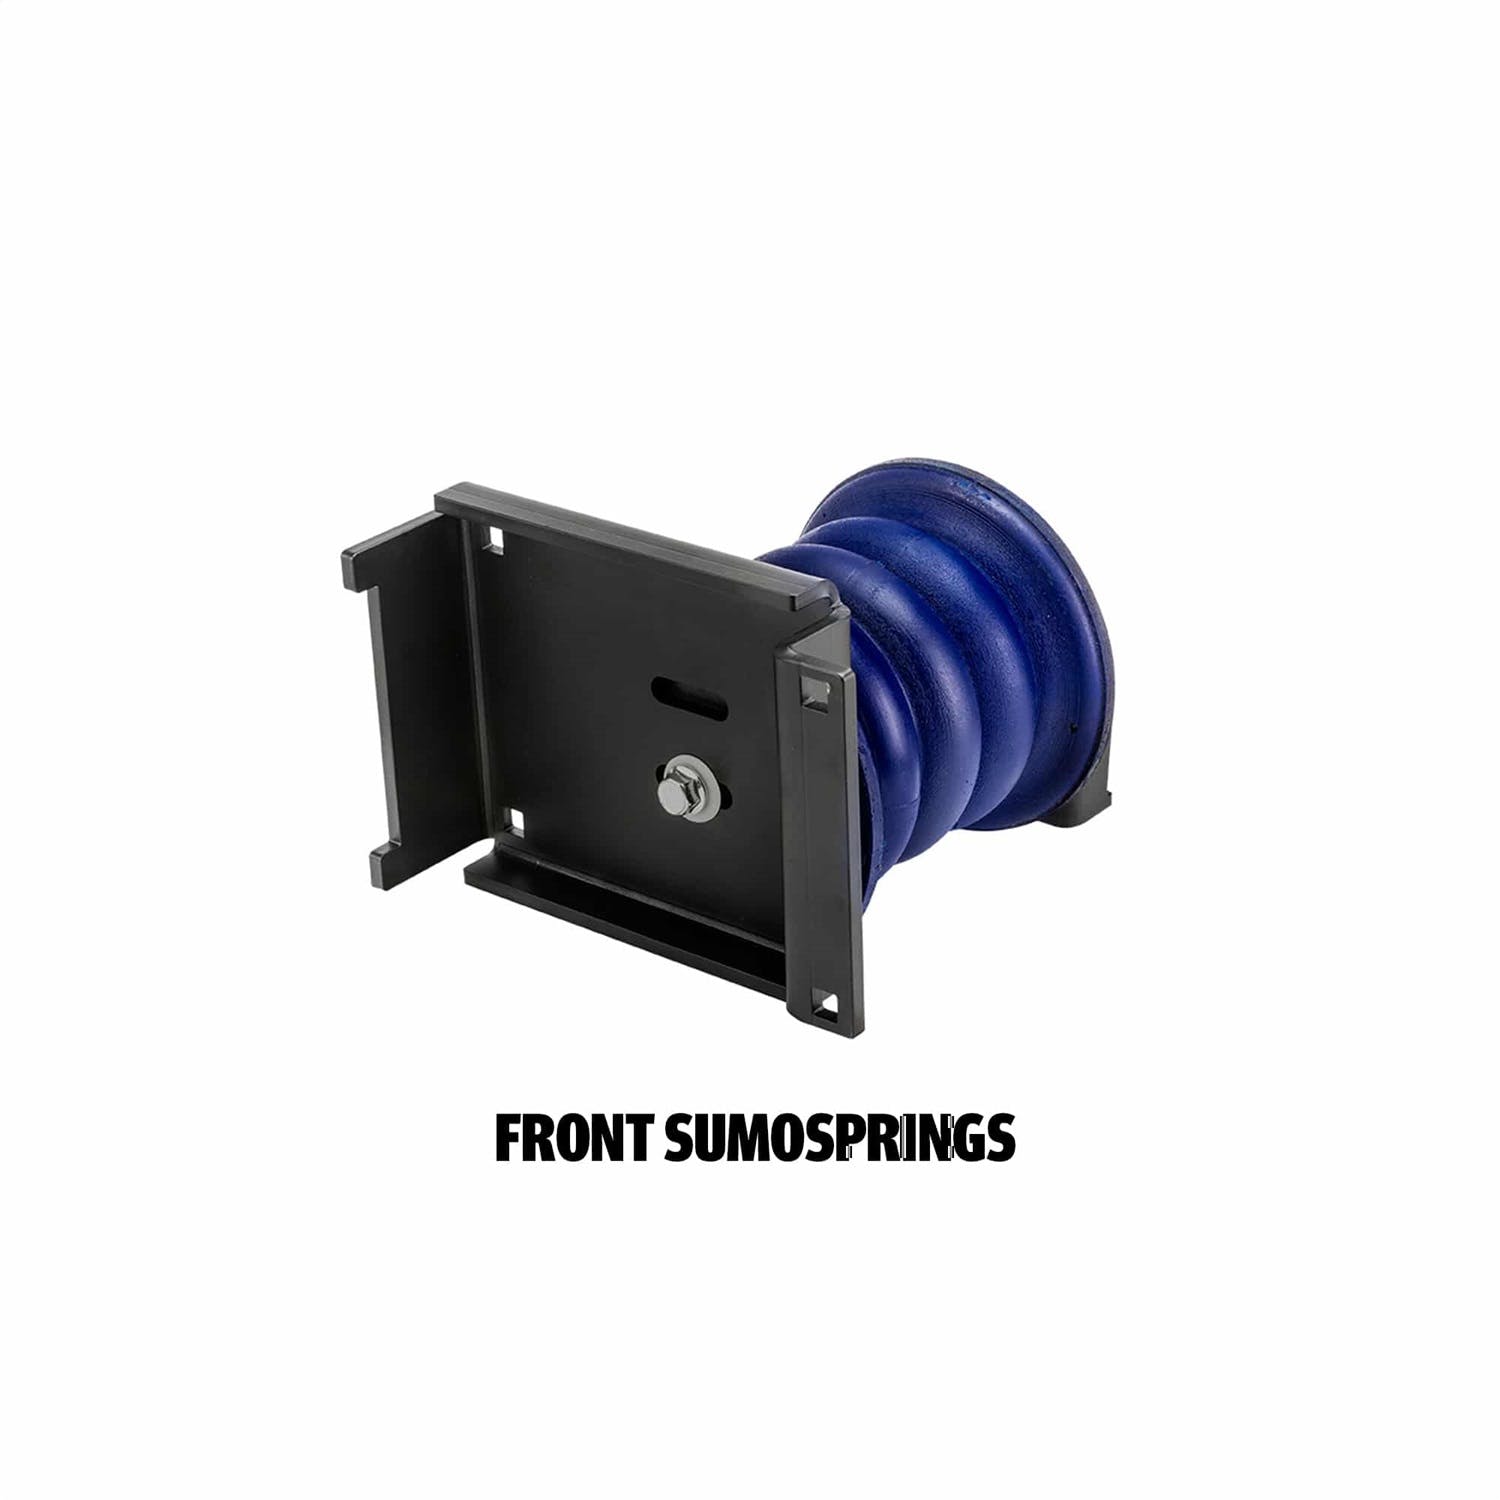 SuperSprings K-10-001 SumoSprings Front and Rear Kits are one-piece units attached on each side